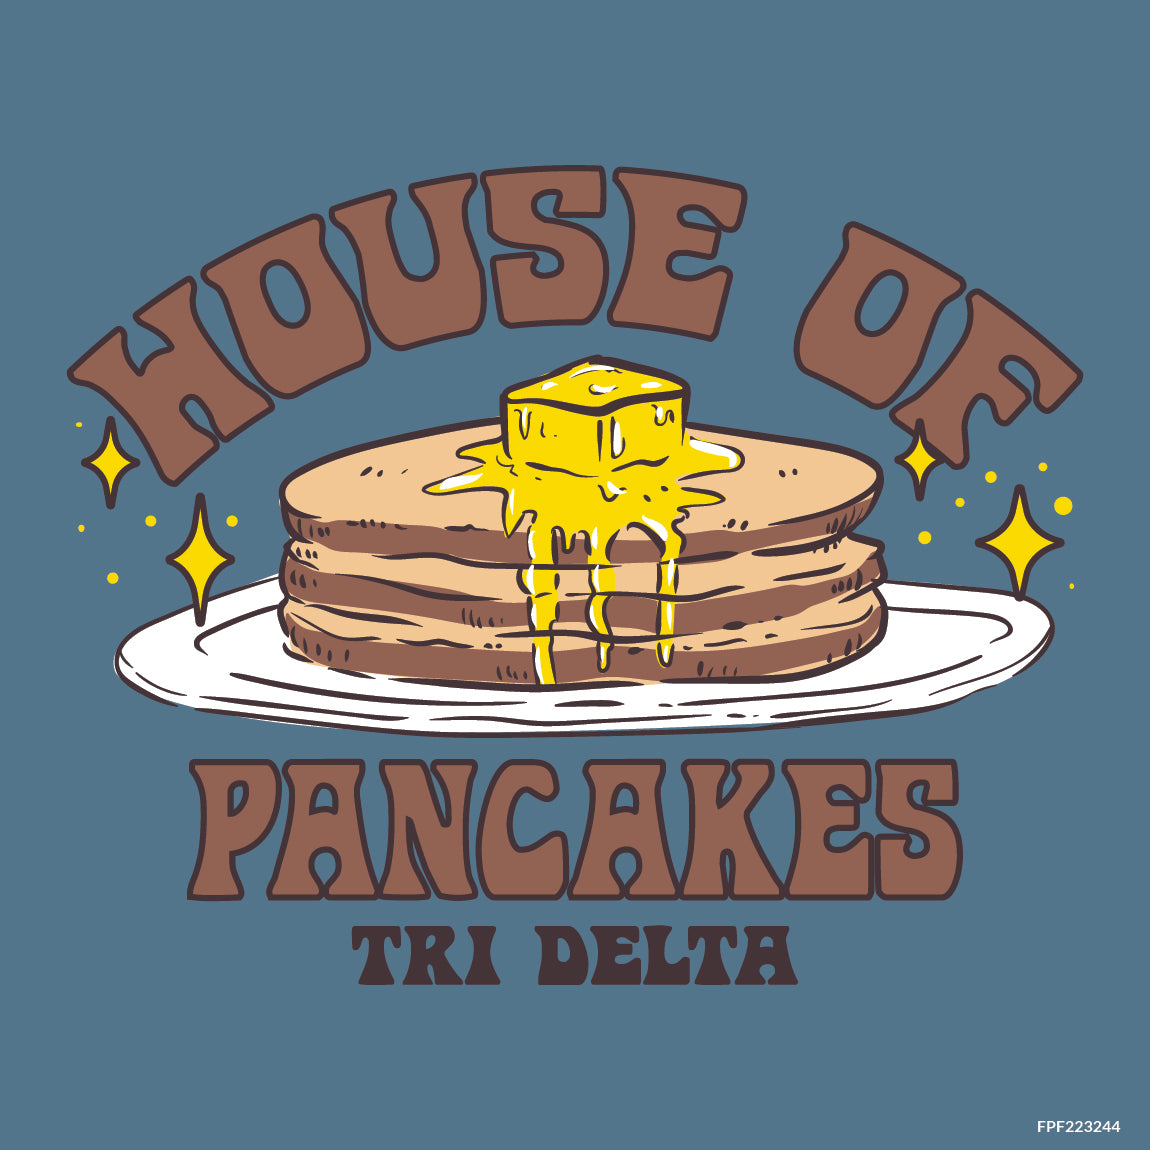 House of Pancakes